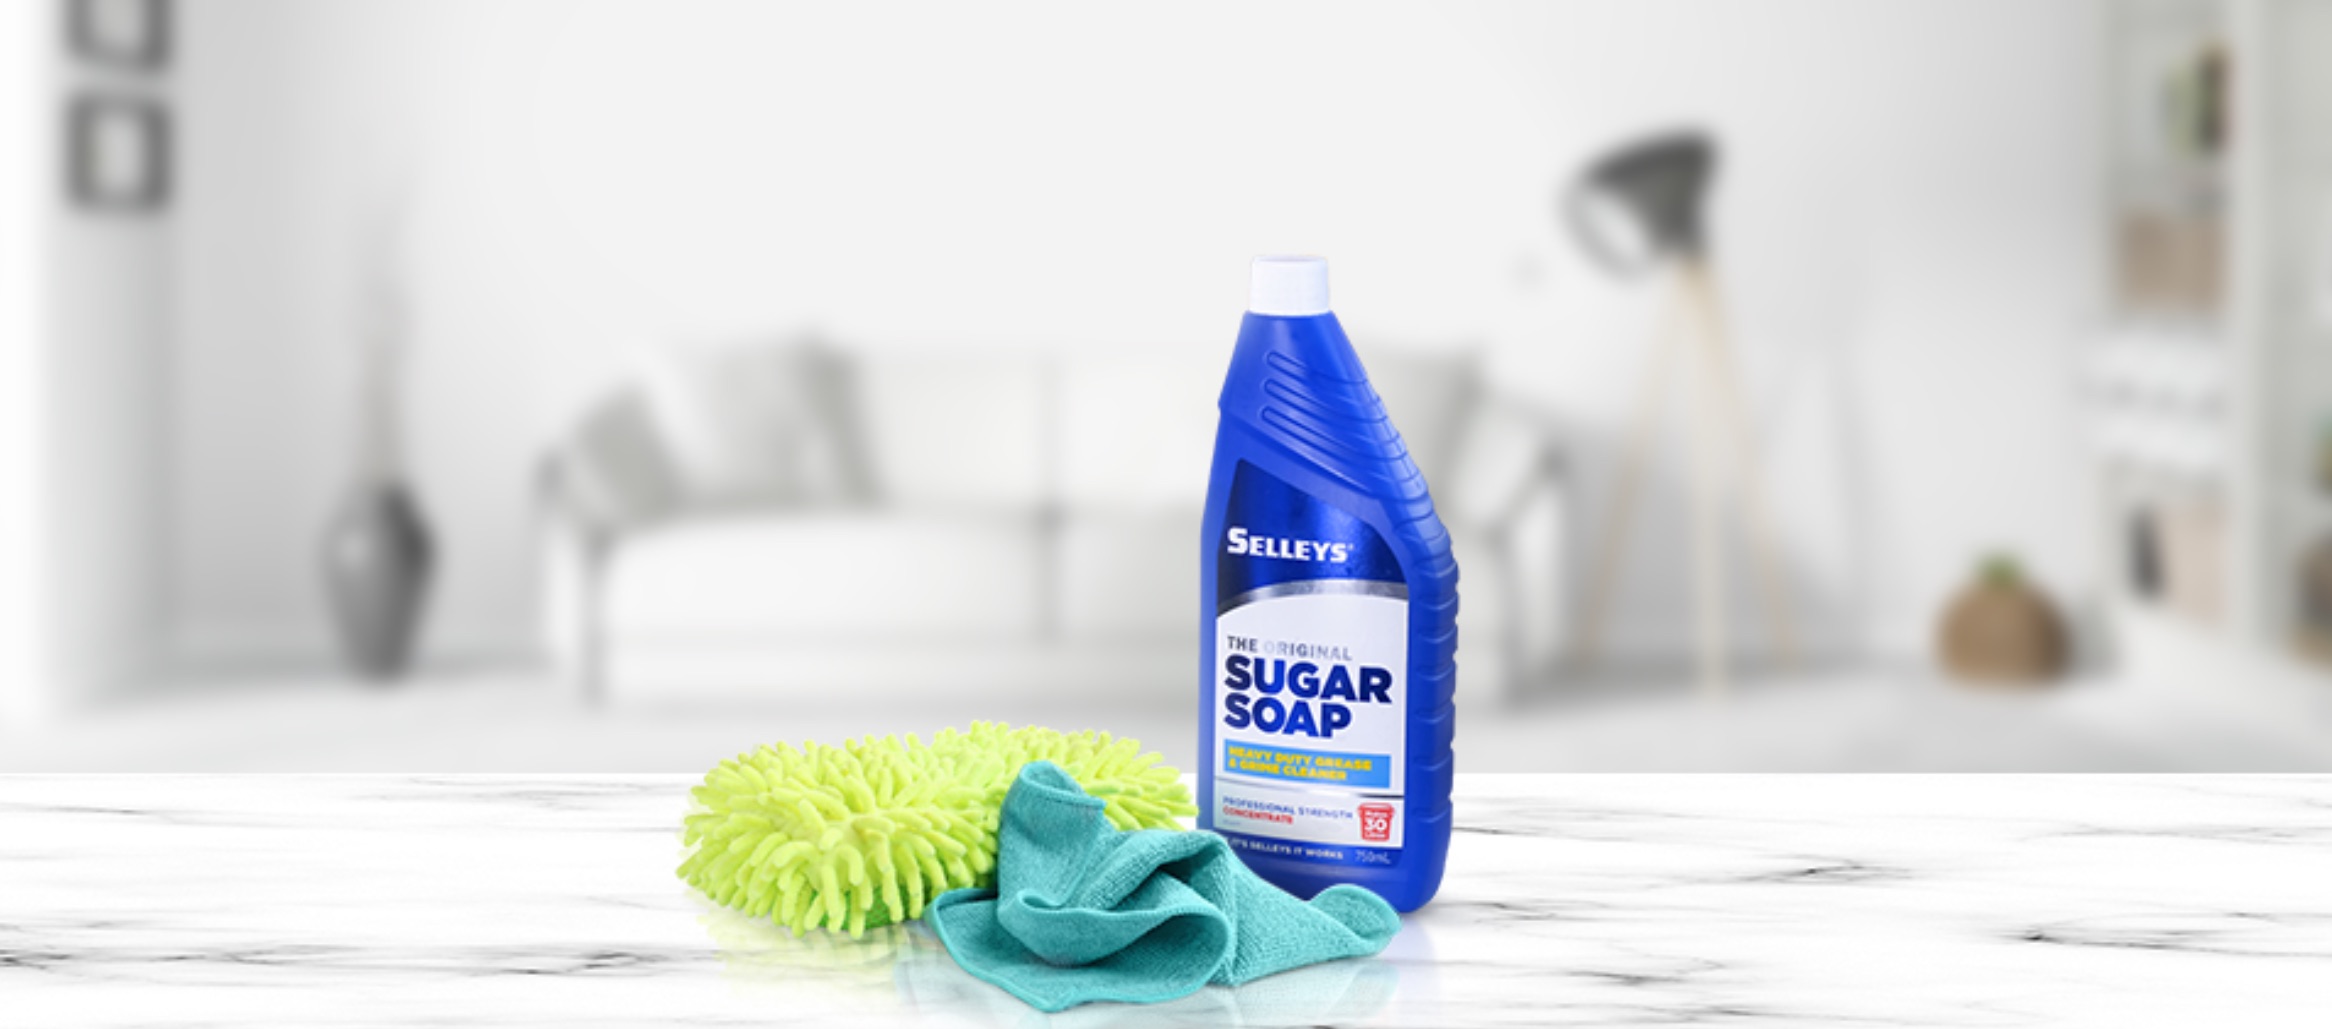 Cleaning Walls and Kitchen Grime with Bartoline Ready To Use Sugar